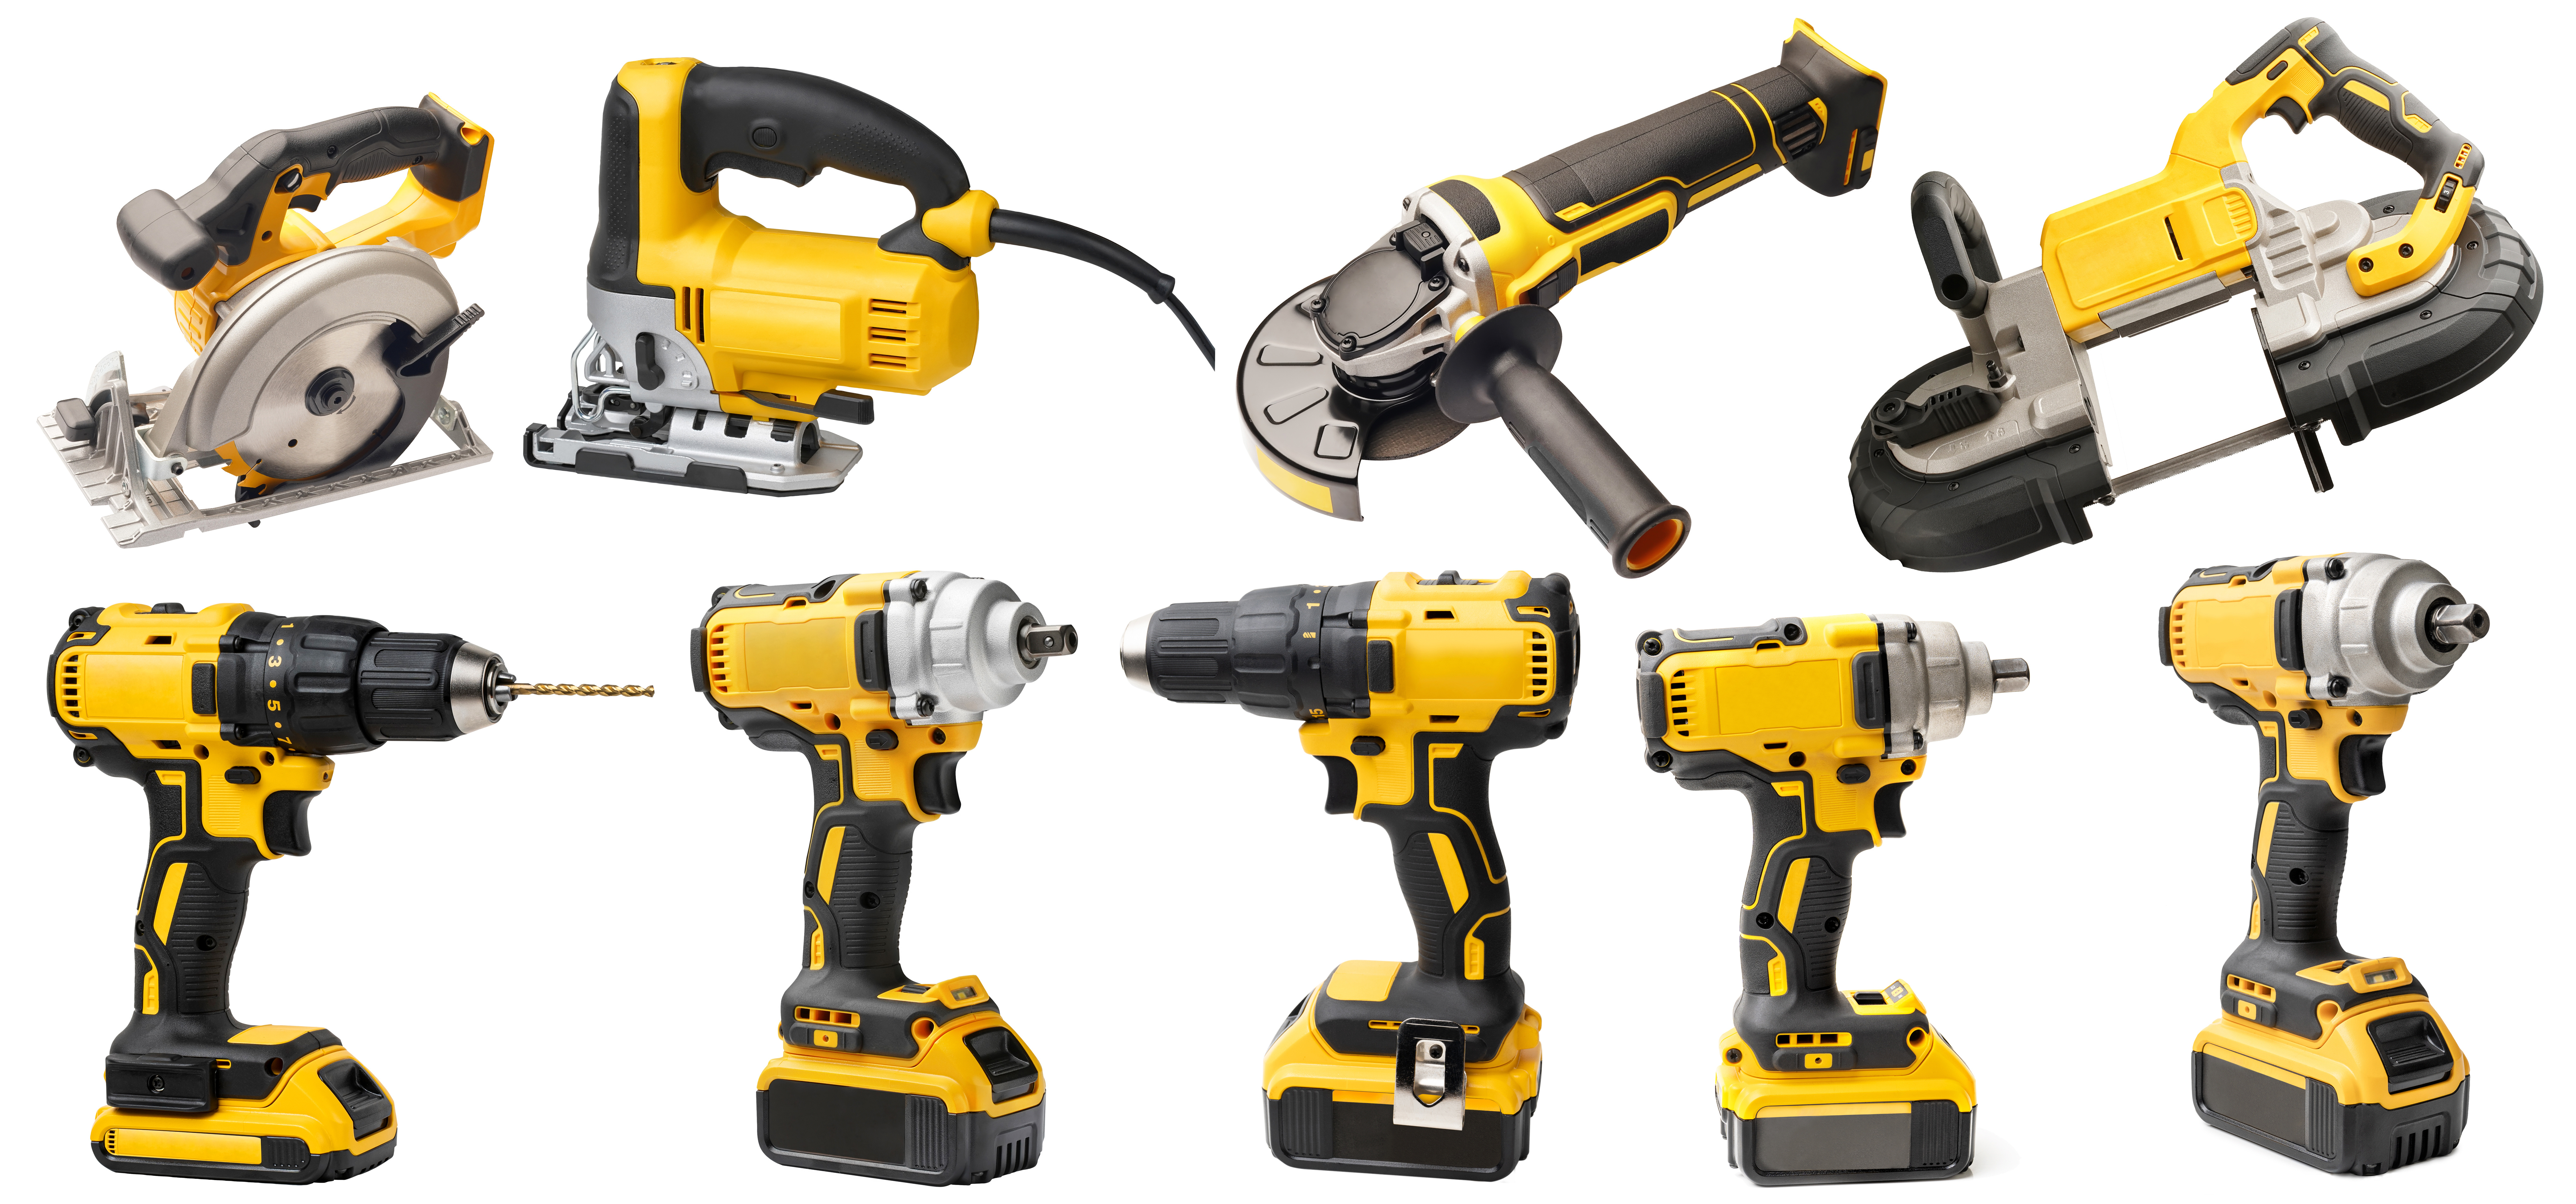 Tools NH: Battery-Powered or Wired Power Tools?